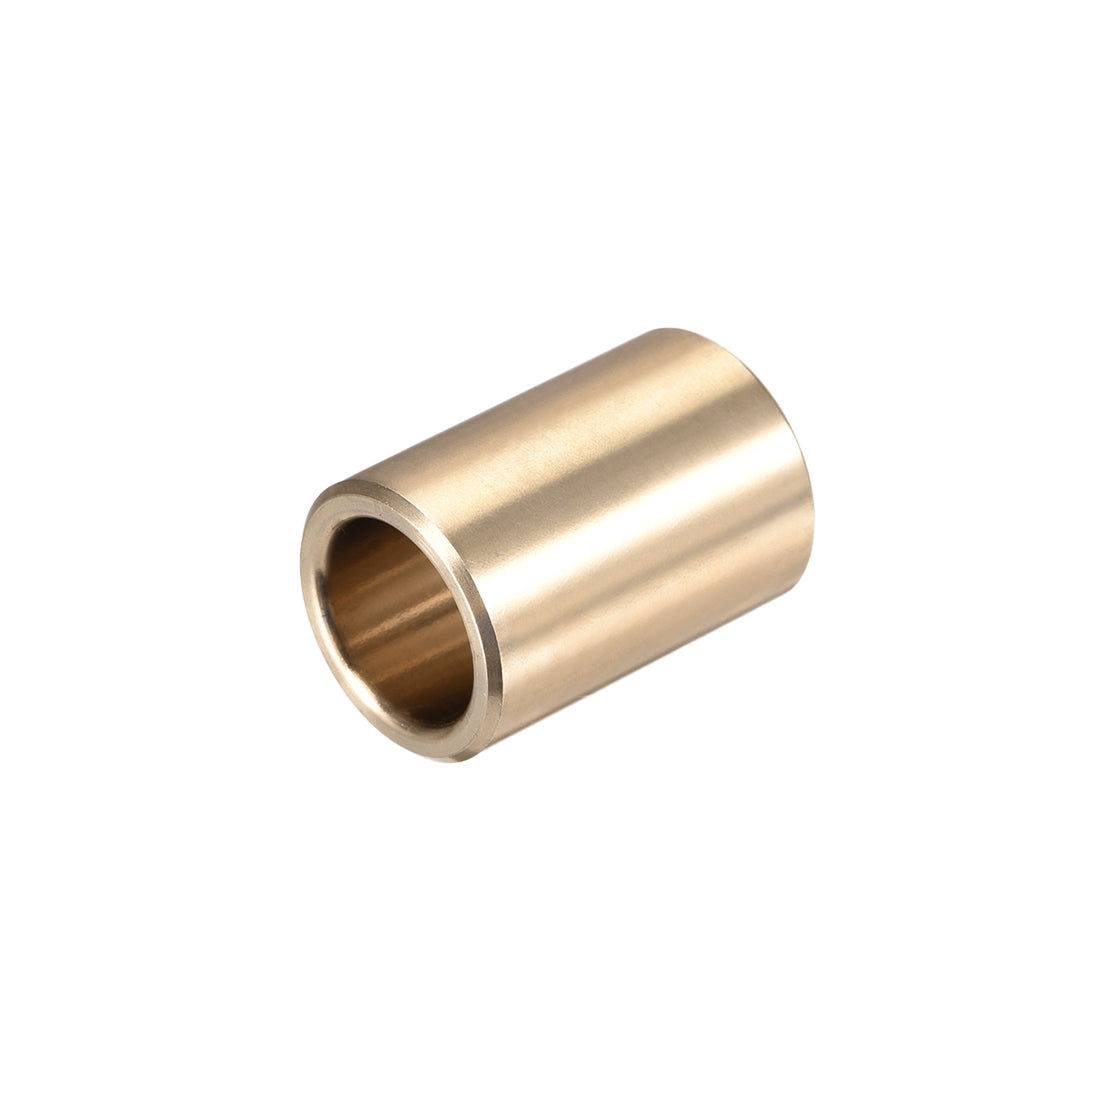 uxcell Uxcell Bearing Sleeve Length Self-Lubricating Sintered Bronze Bushing